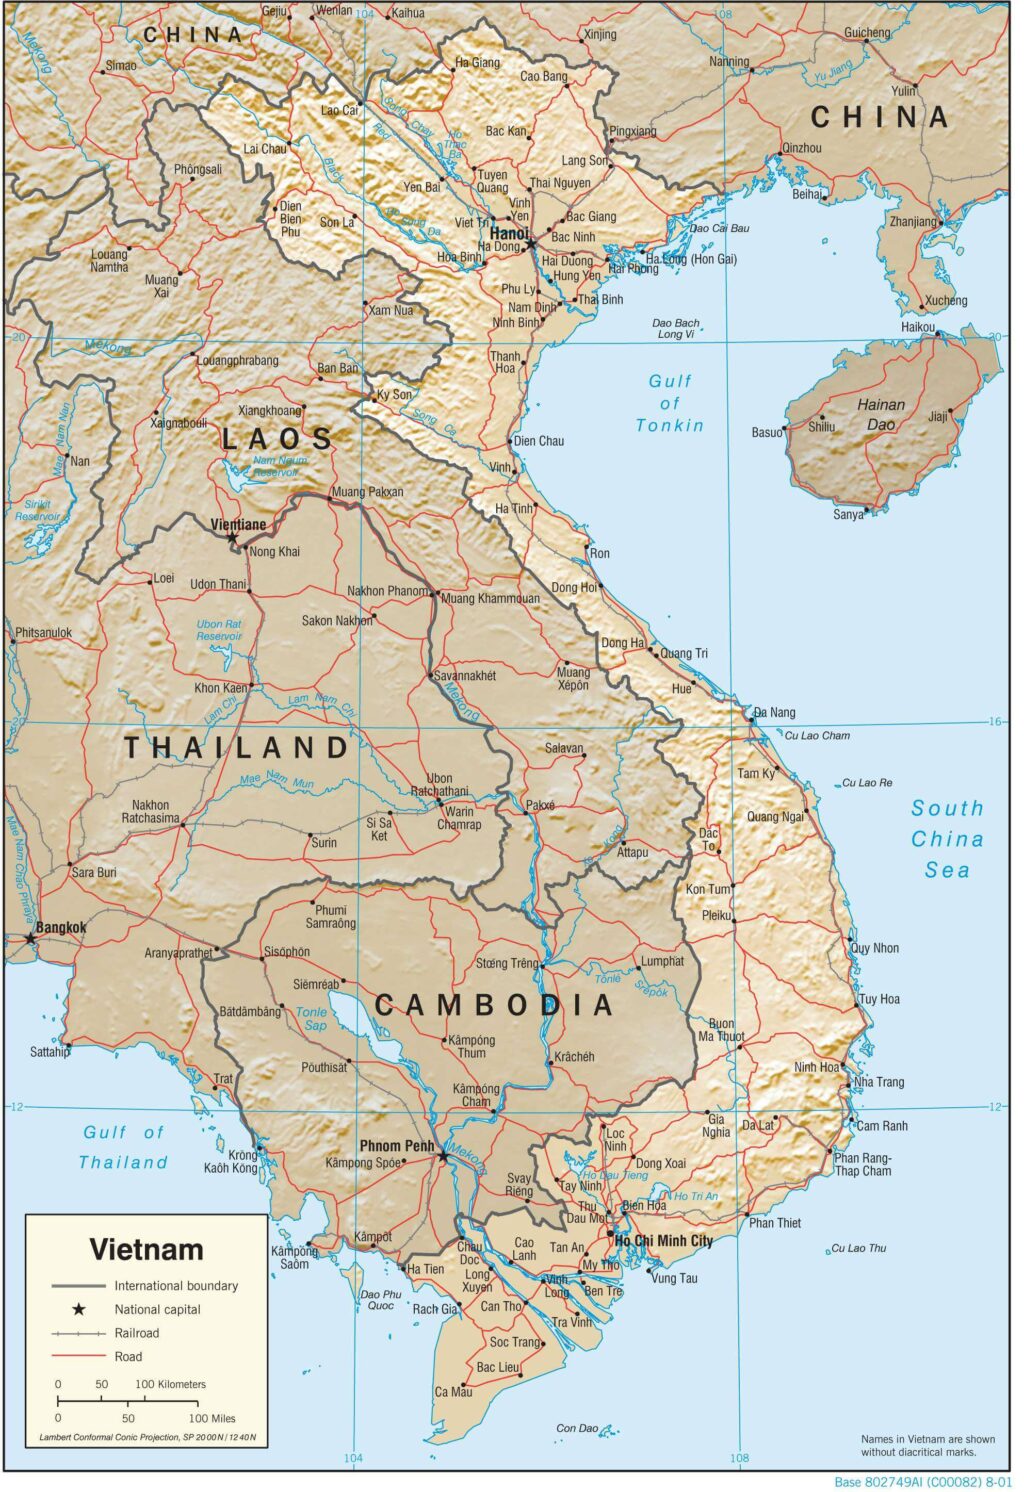 Vietnam physiography map.